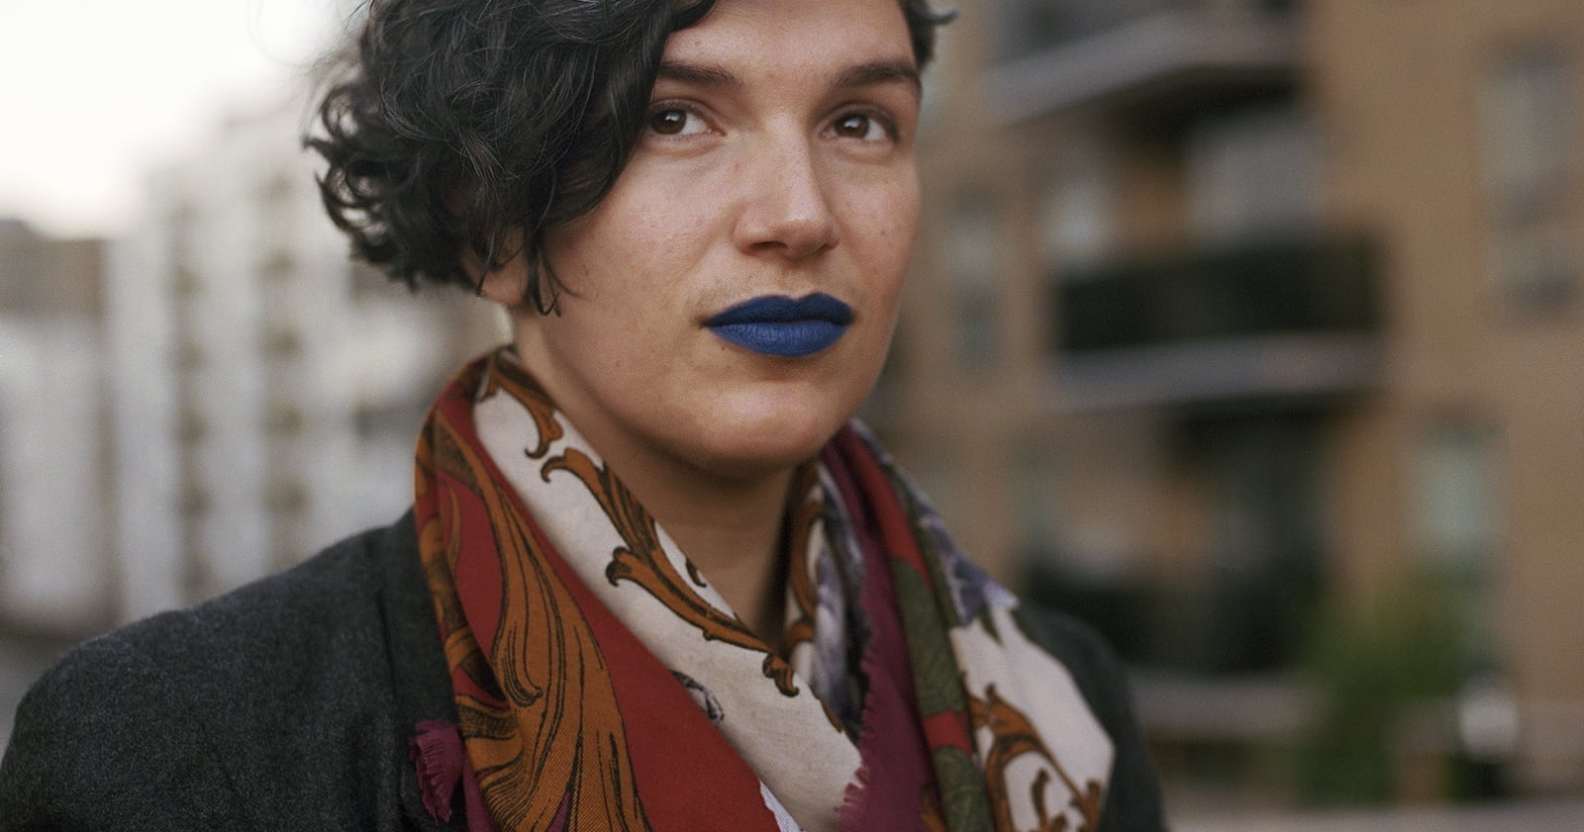 Photo Series Challenges What A Non Binary Person Looks Like Pinknews 6361